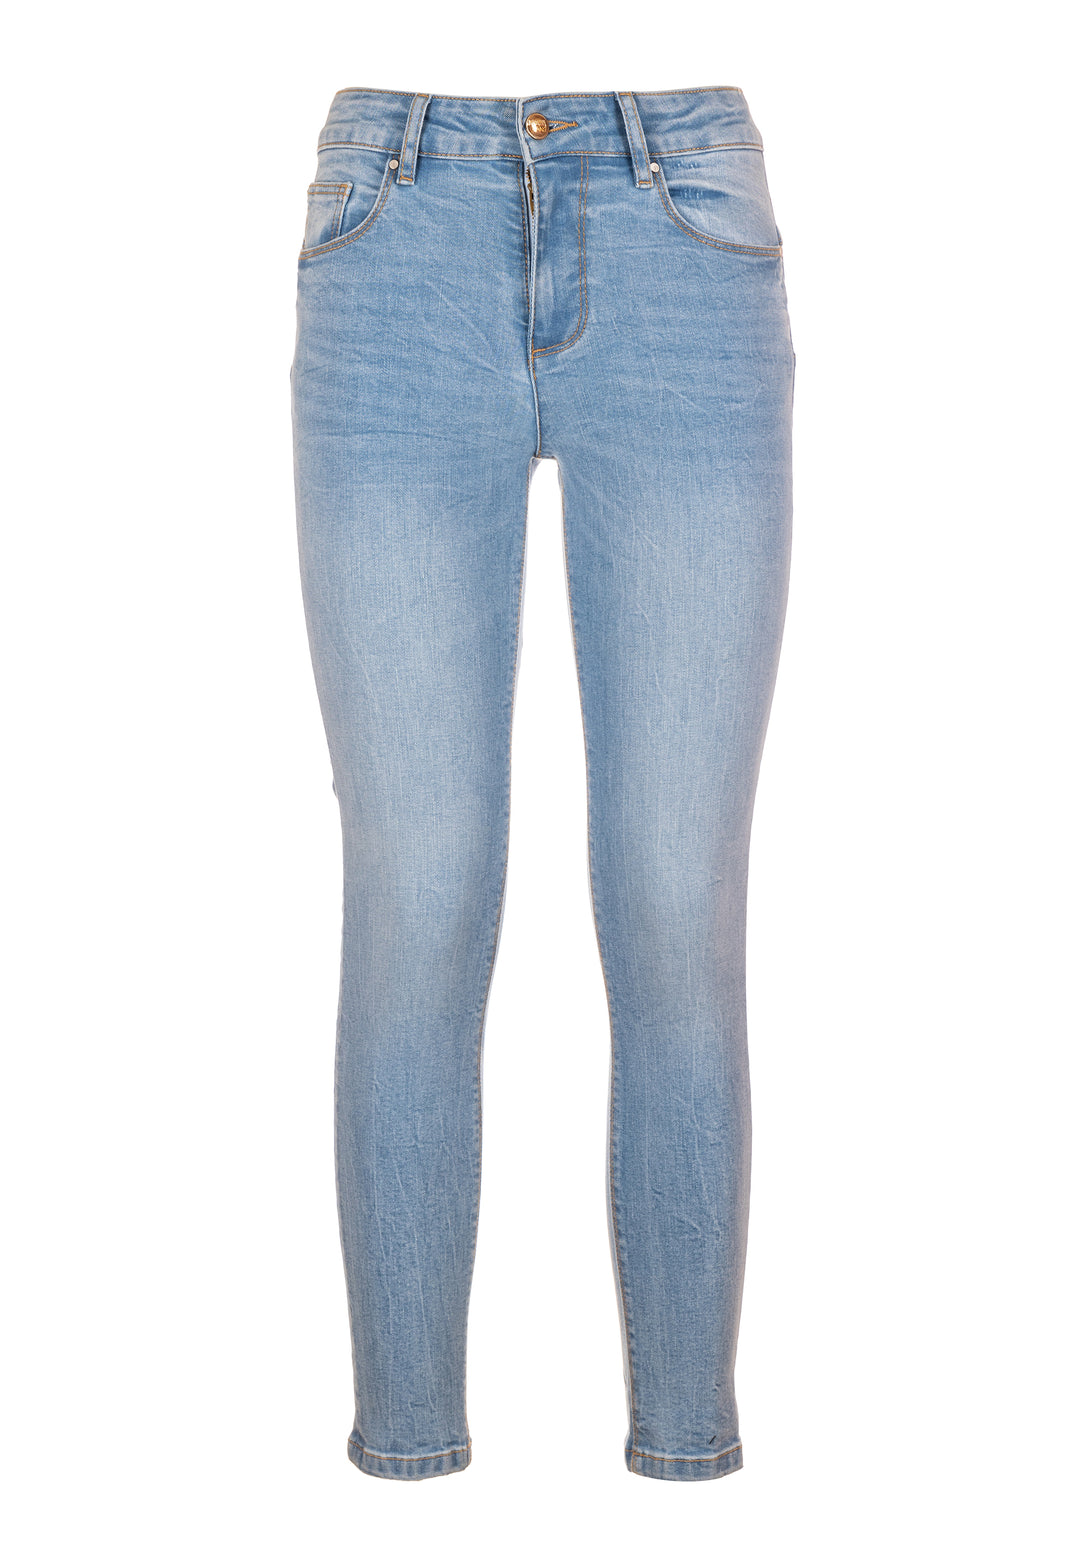 Jeans skinny fit with push up effect made in denim with light wash and bleach